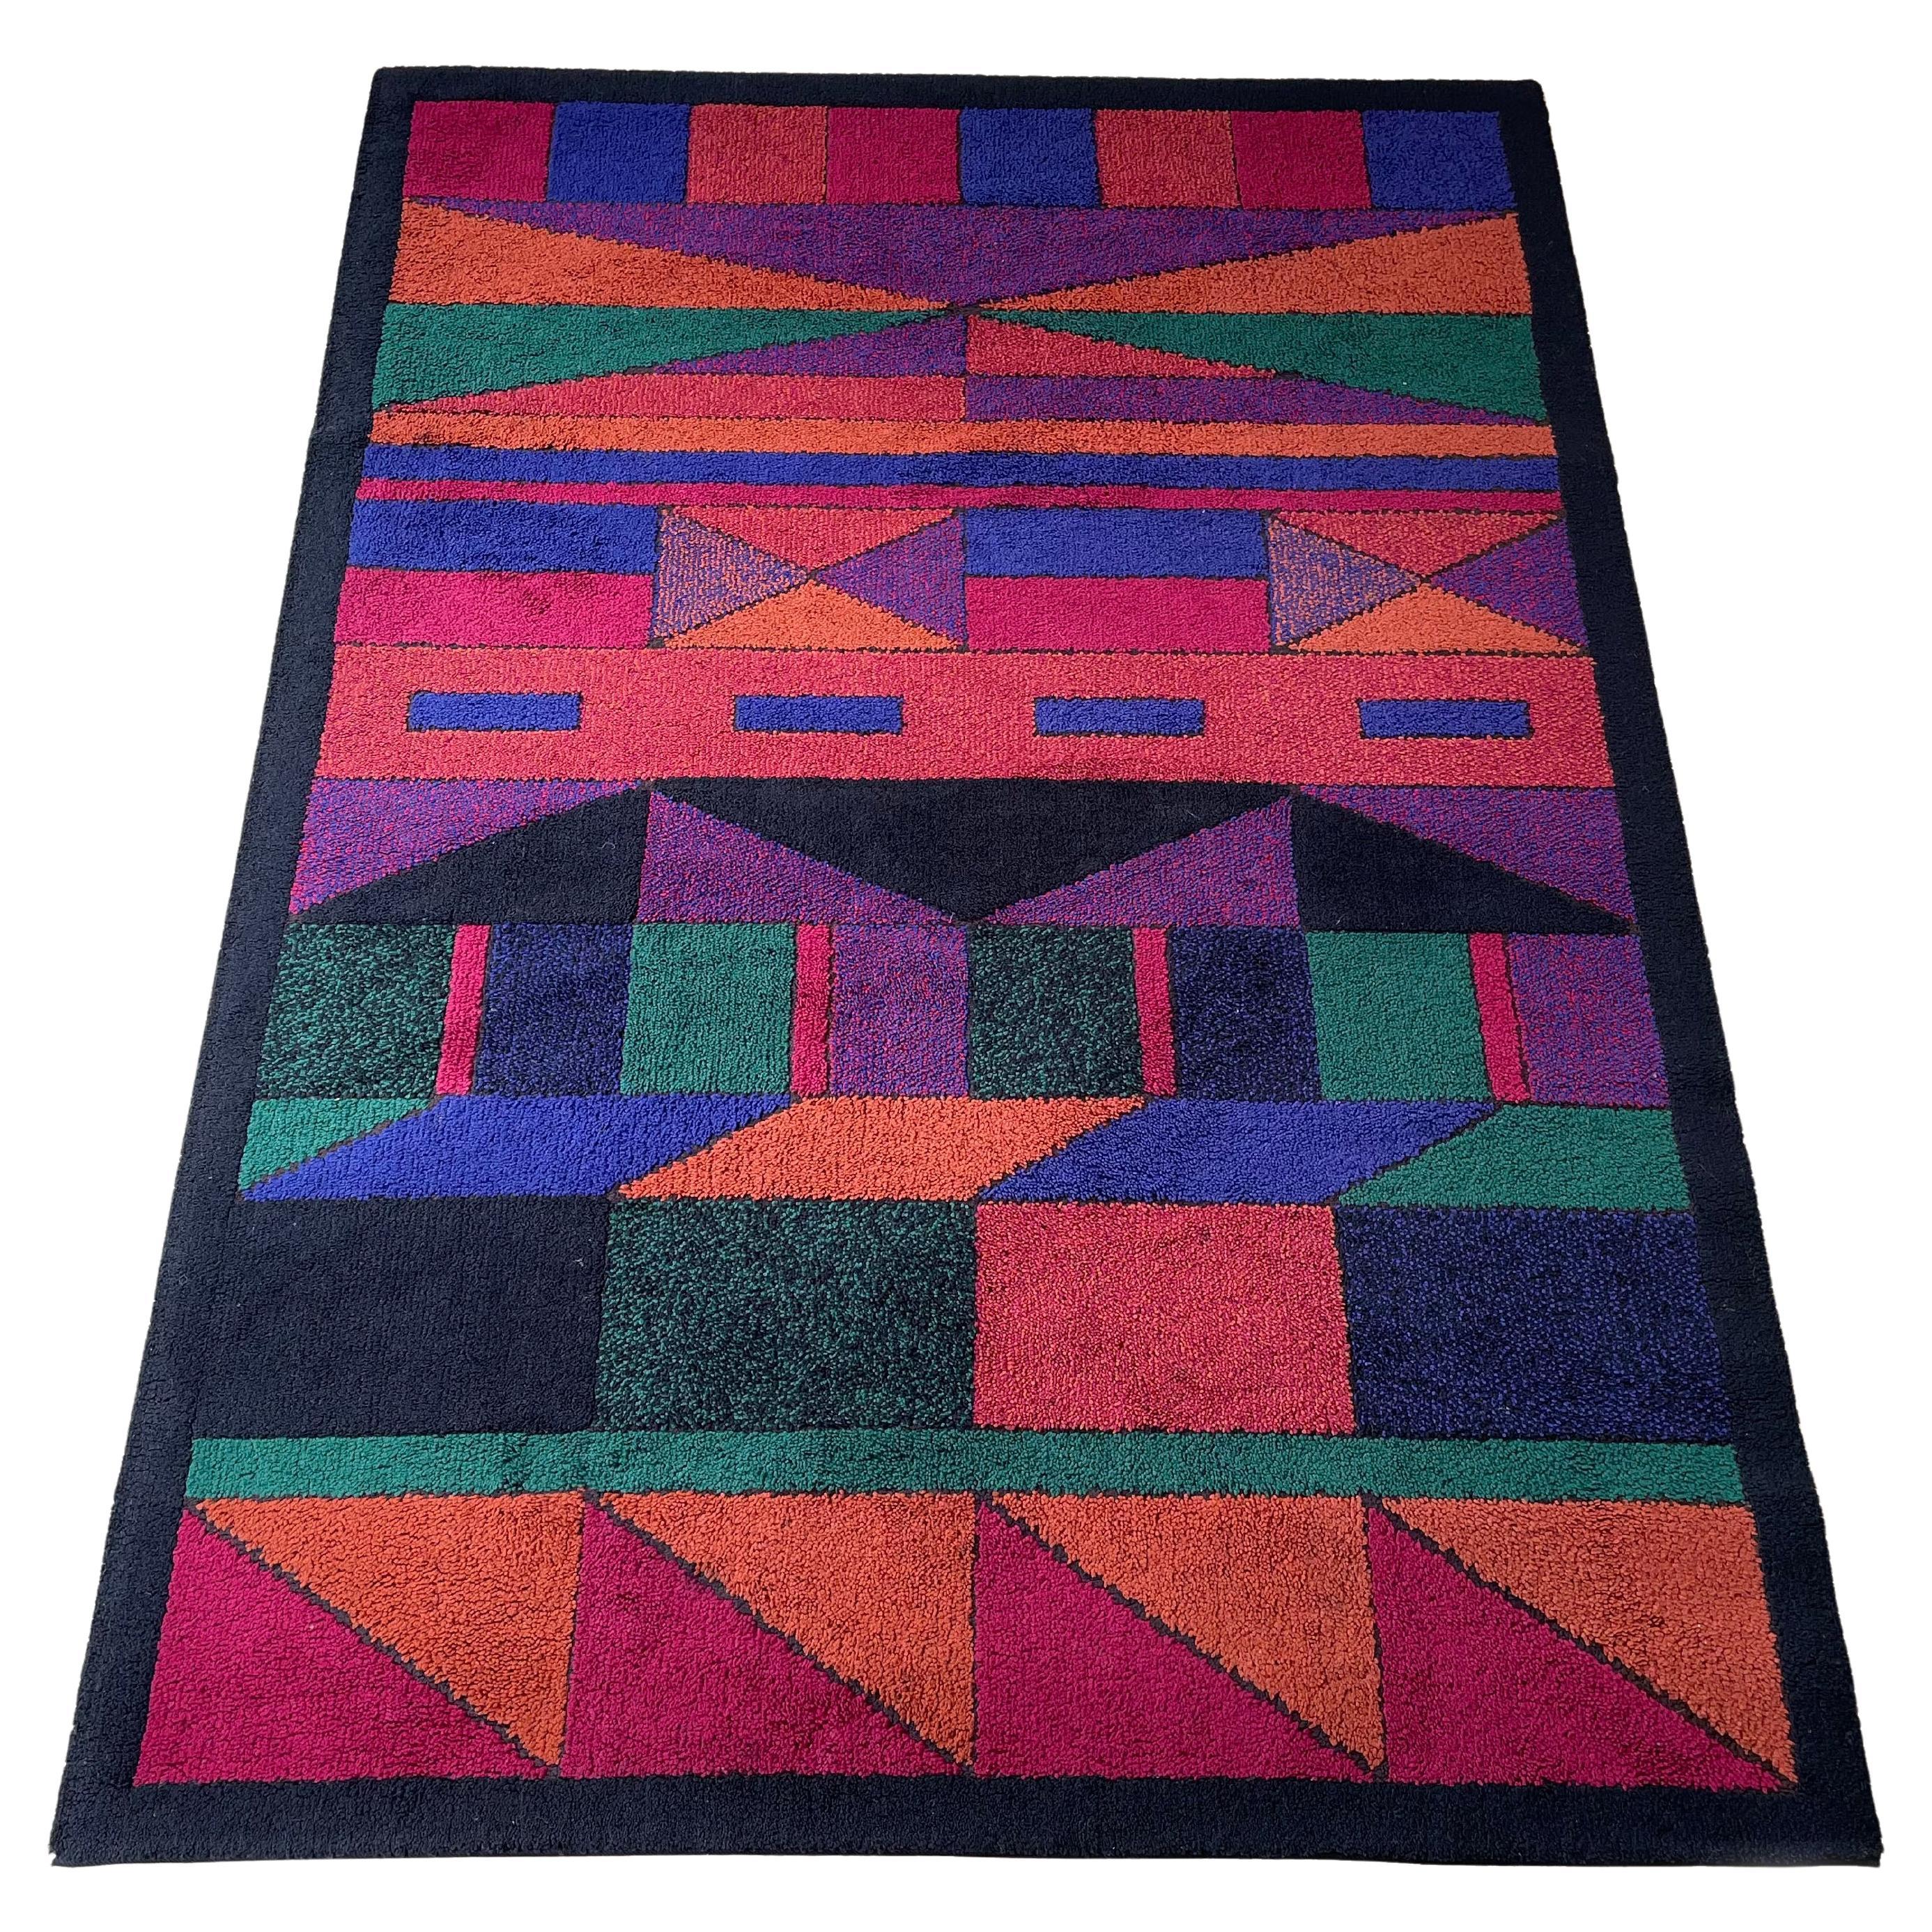 Psychedelic Memphis Style abstract Rug Carpet by Atrium Tefzet, Germany 1980s For Sale